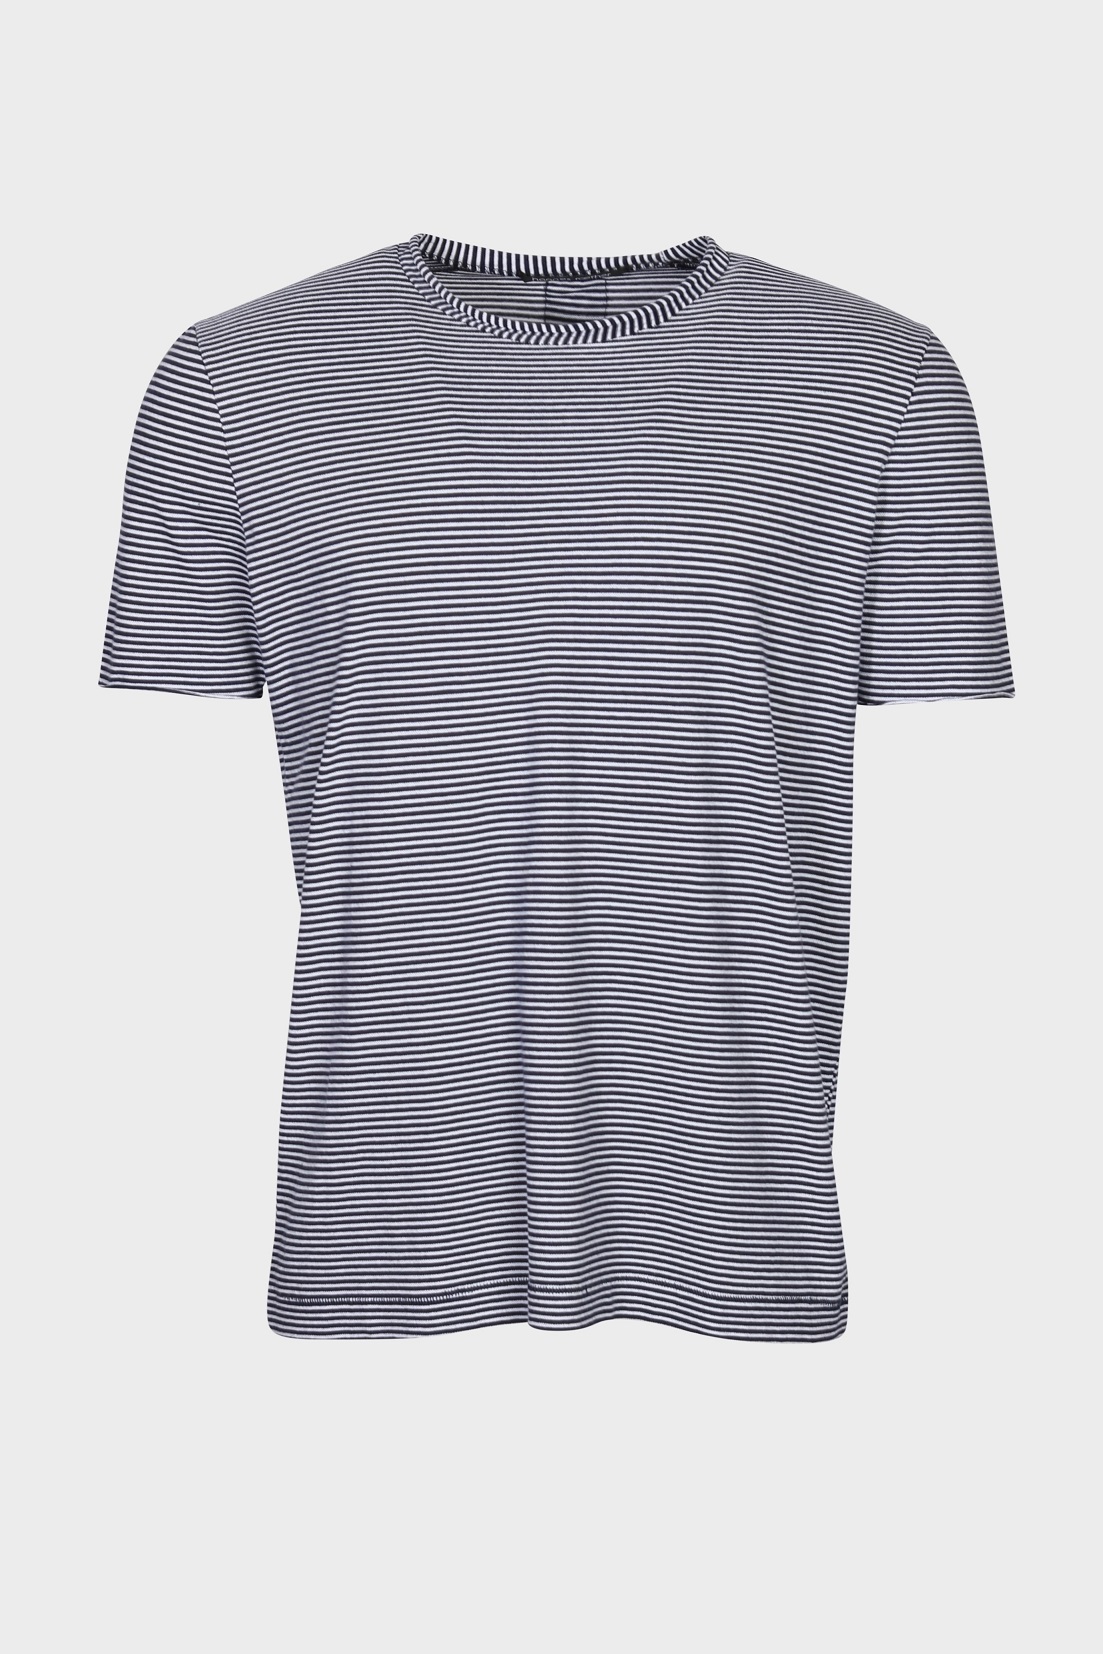 HANNES ROETHER T-Shirt in Navy/White Stripes M